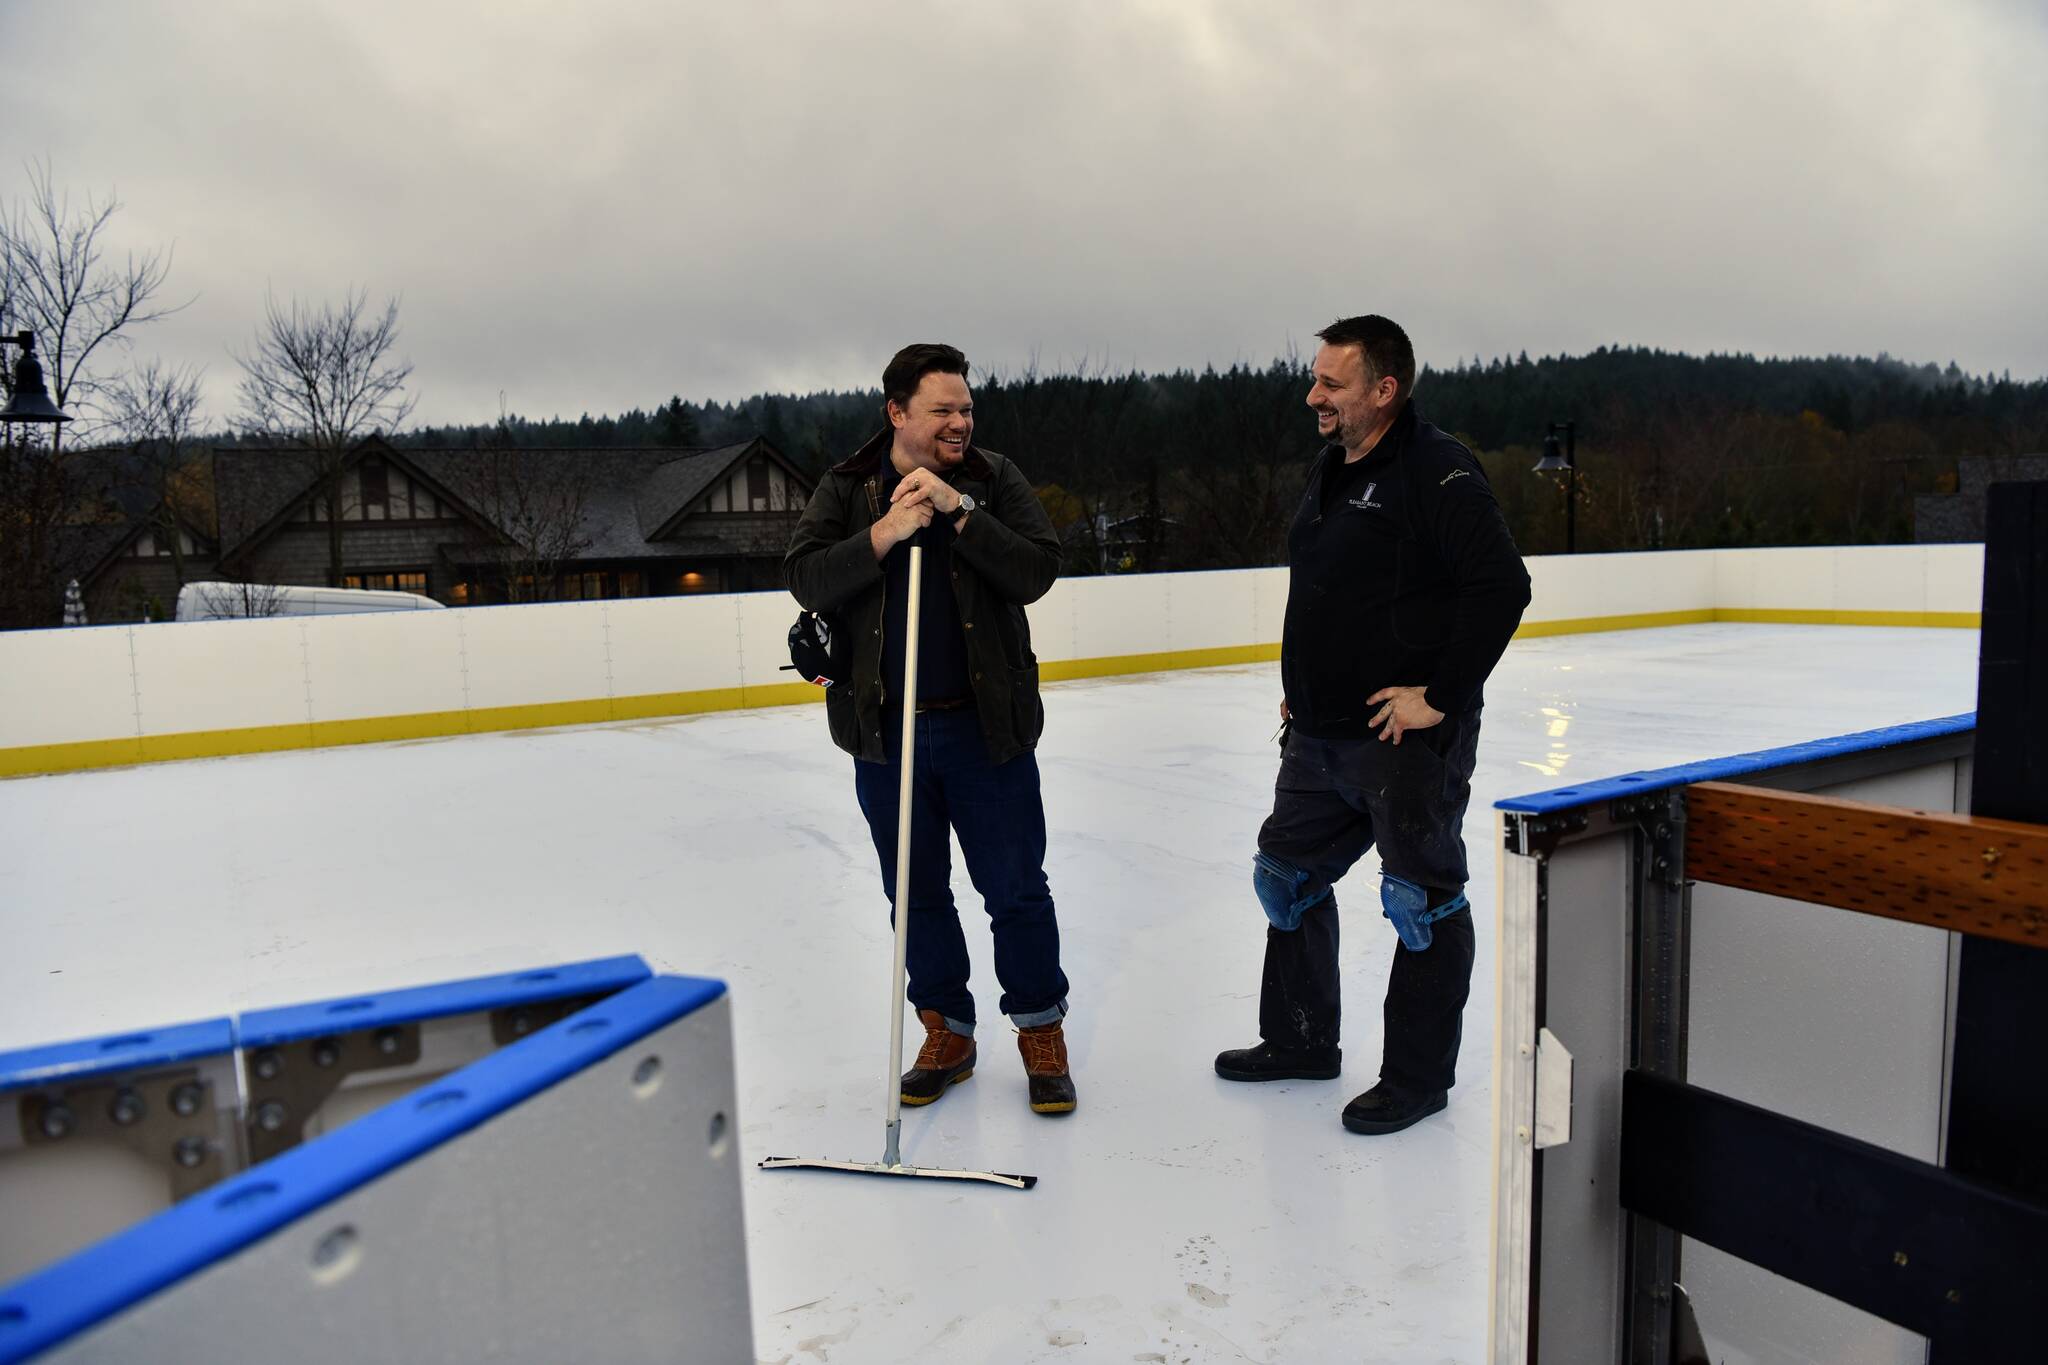 Pleasant Beach Village general manager Joe Raymond and Josh Sluys, director of facilities, making the final checks on the new skating rink before it opened to the public Nov. 26. The new facility is a synthetic ice skating rink that will be open through the winter months.